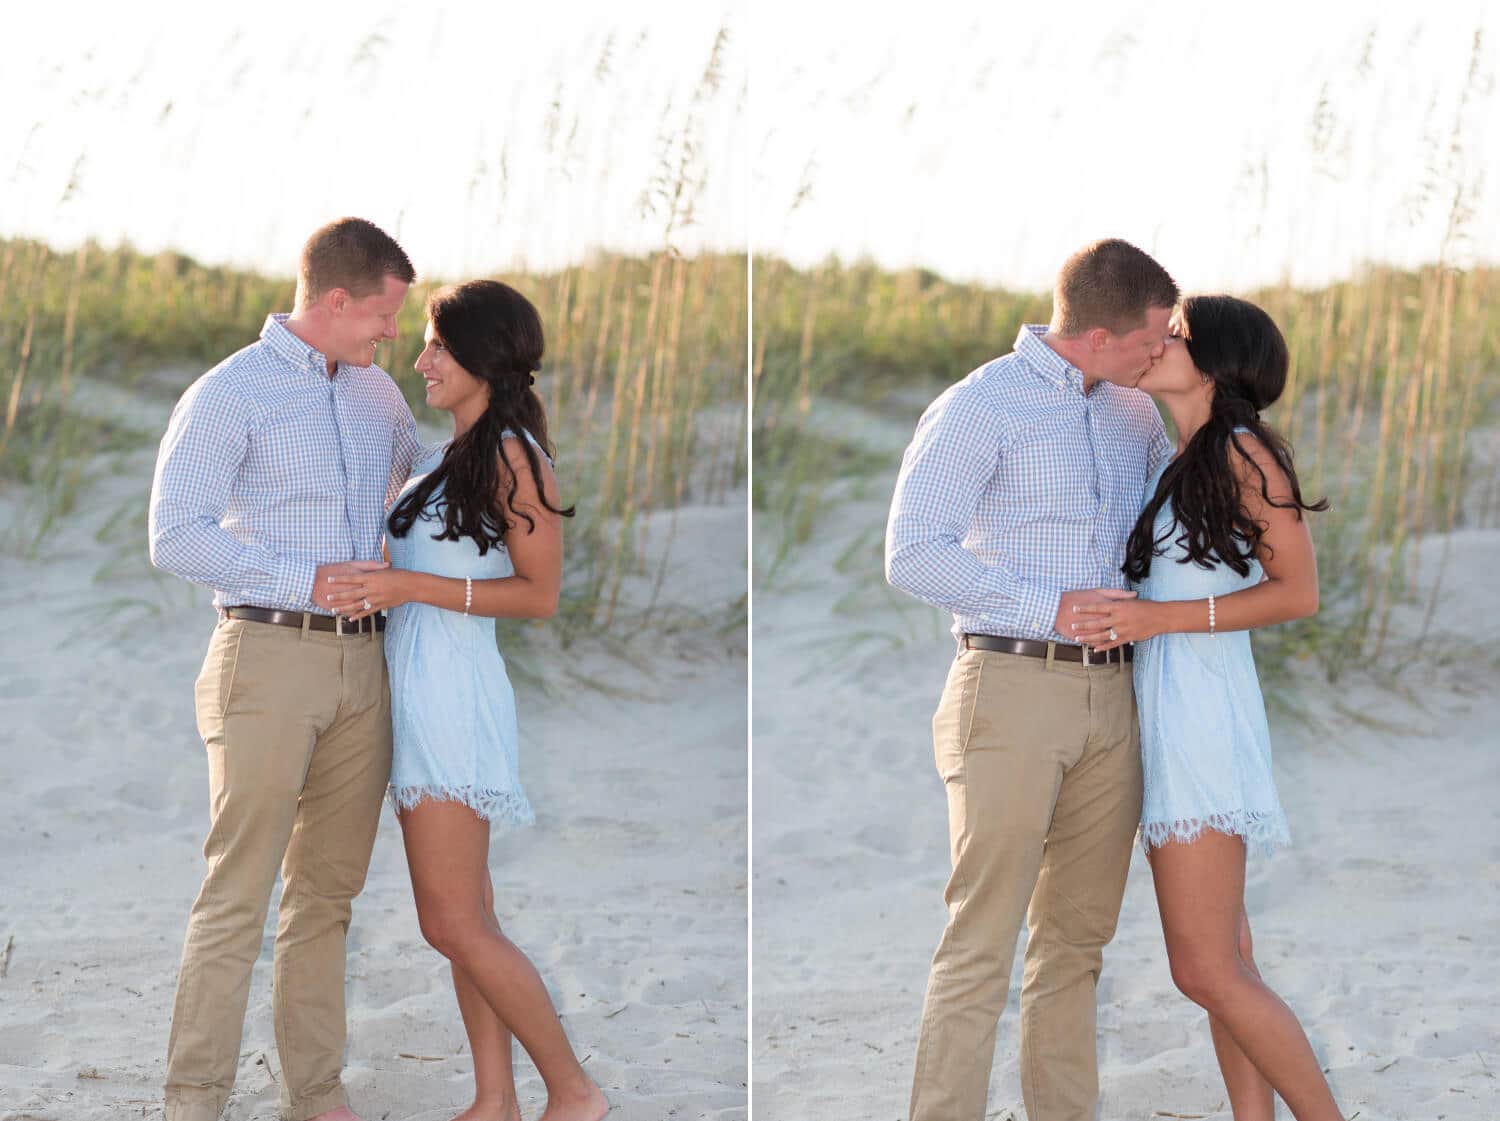 Kiss in front of the dunes after proposal